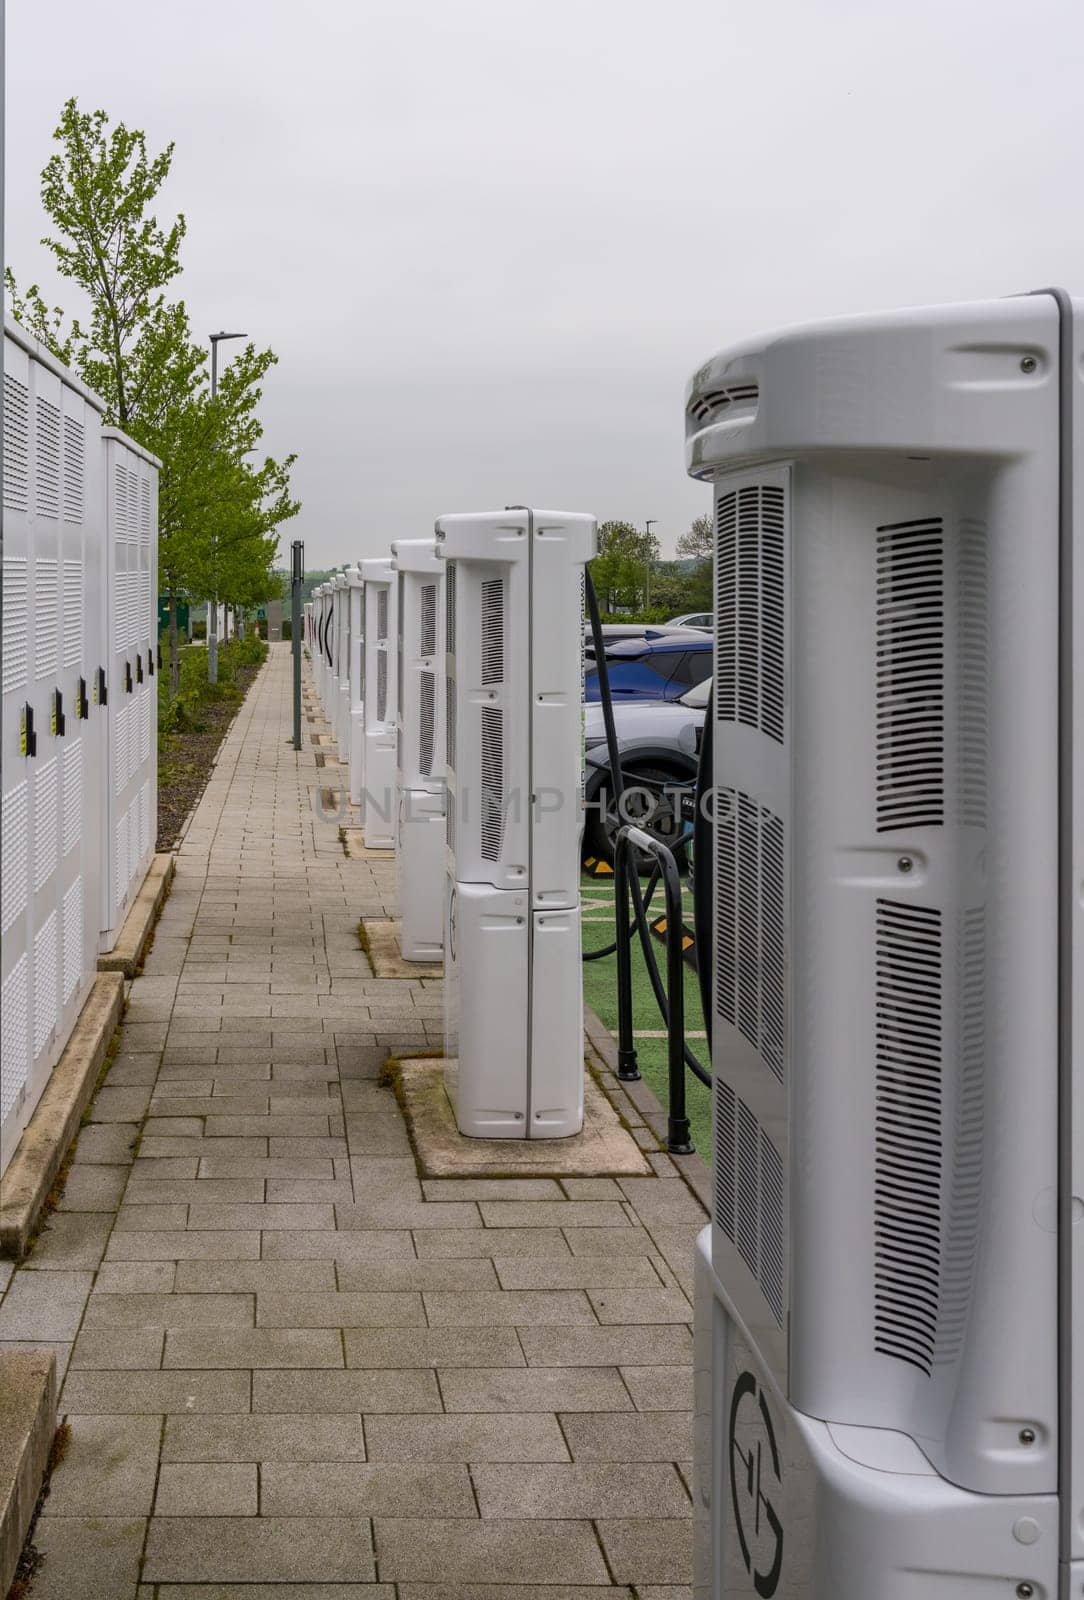 Tritium electric vehicle charging station on motorway in UK by steheap